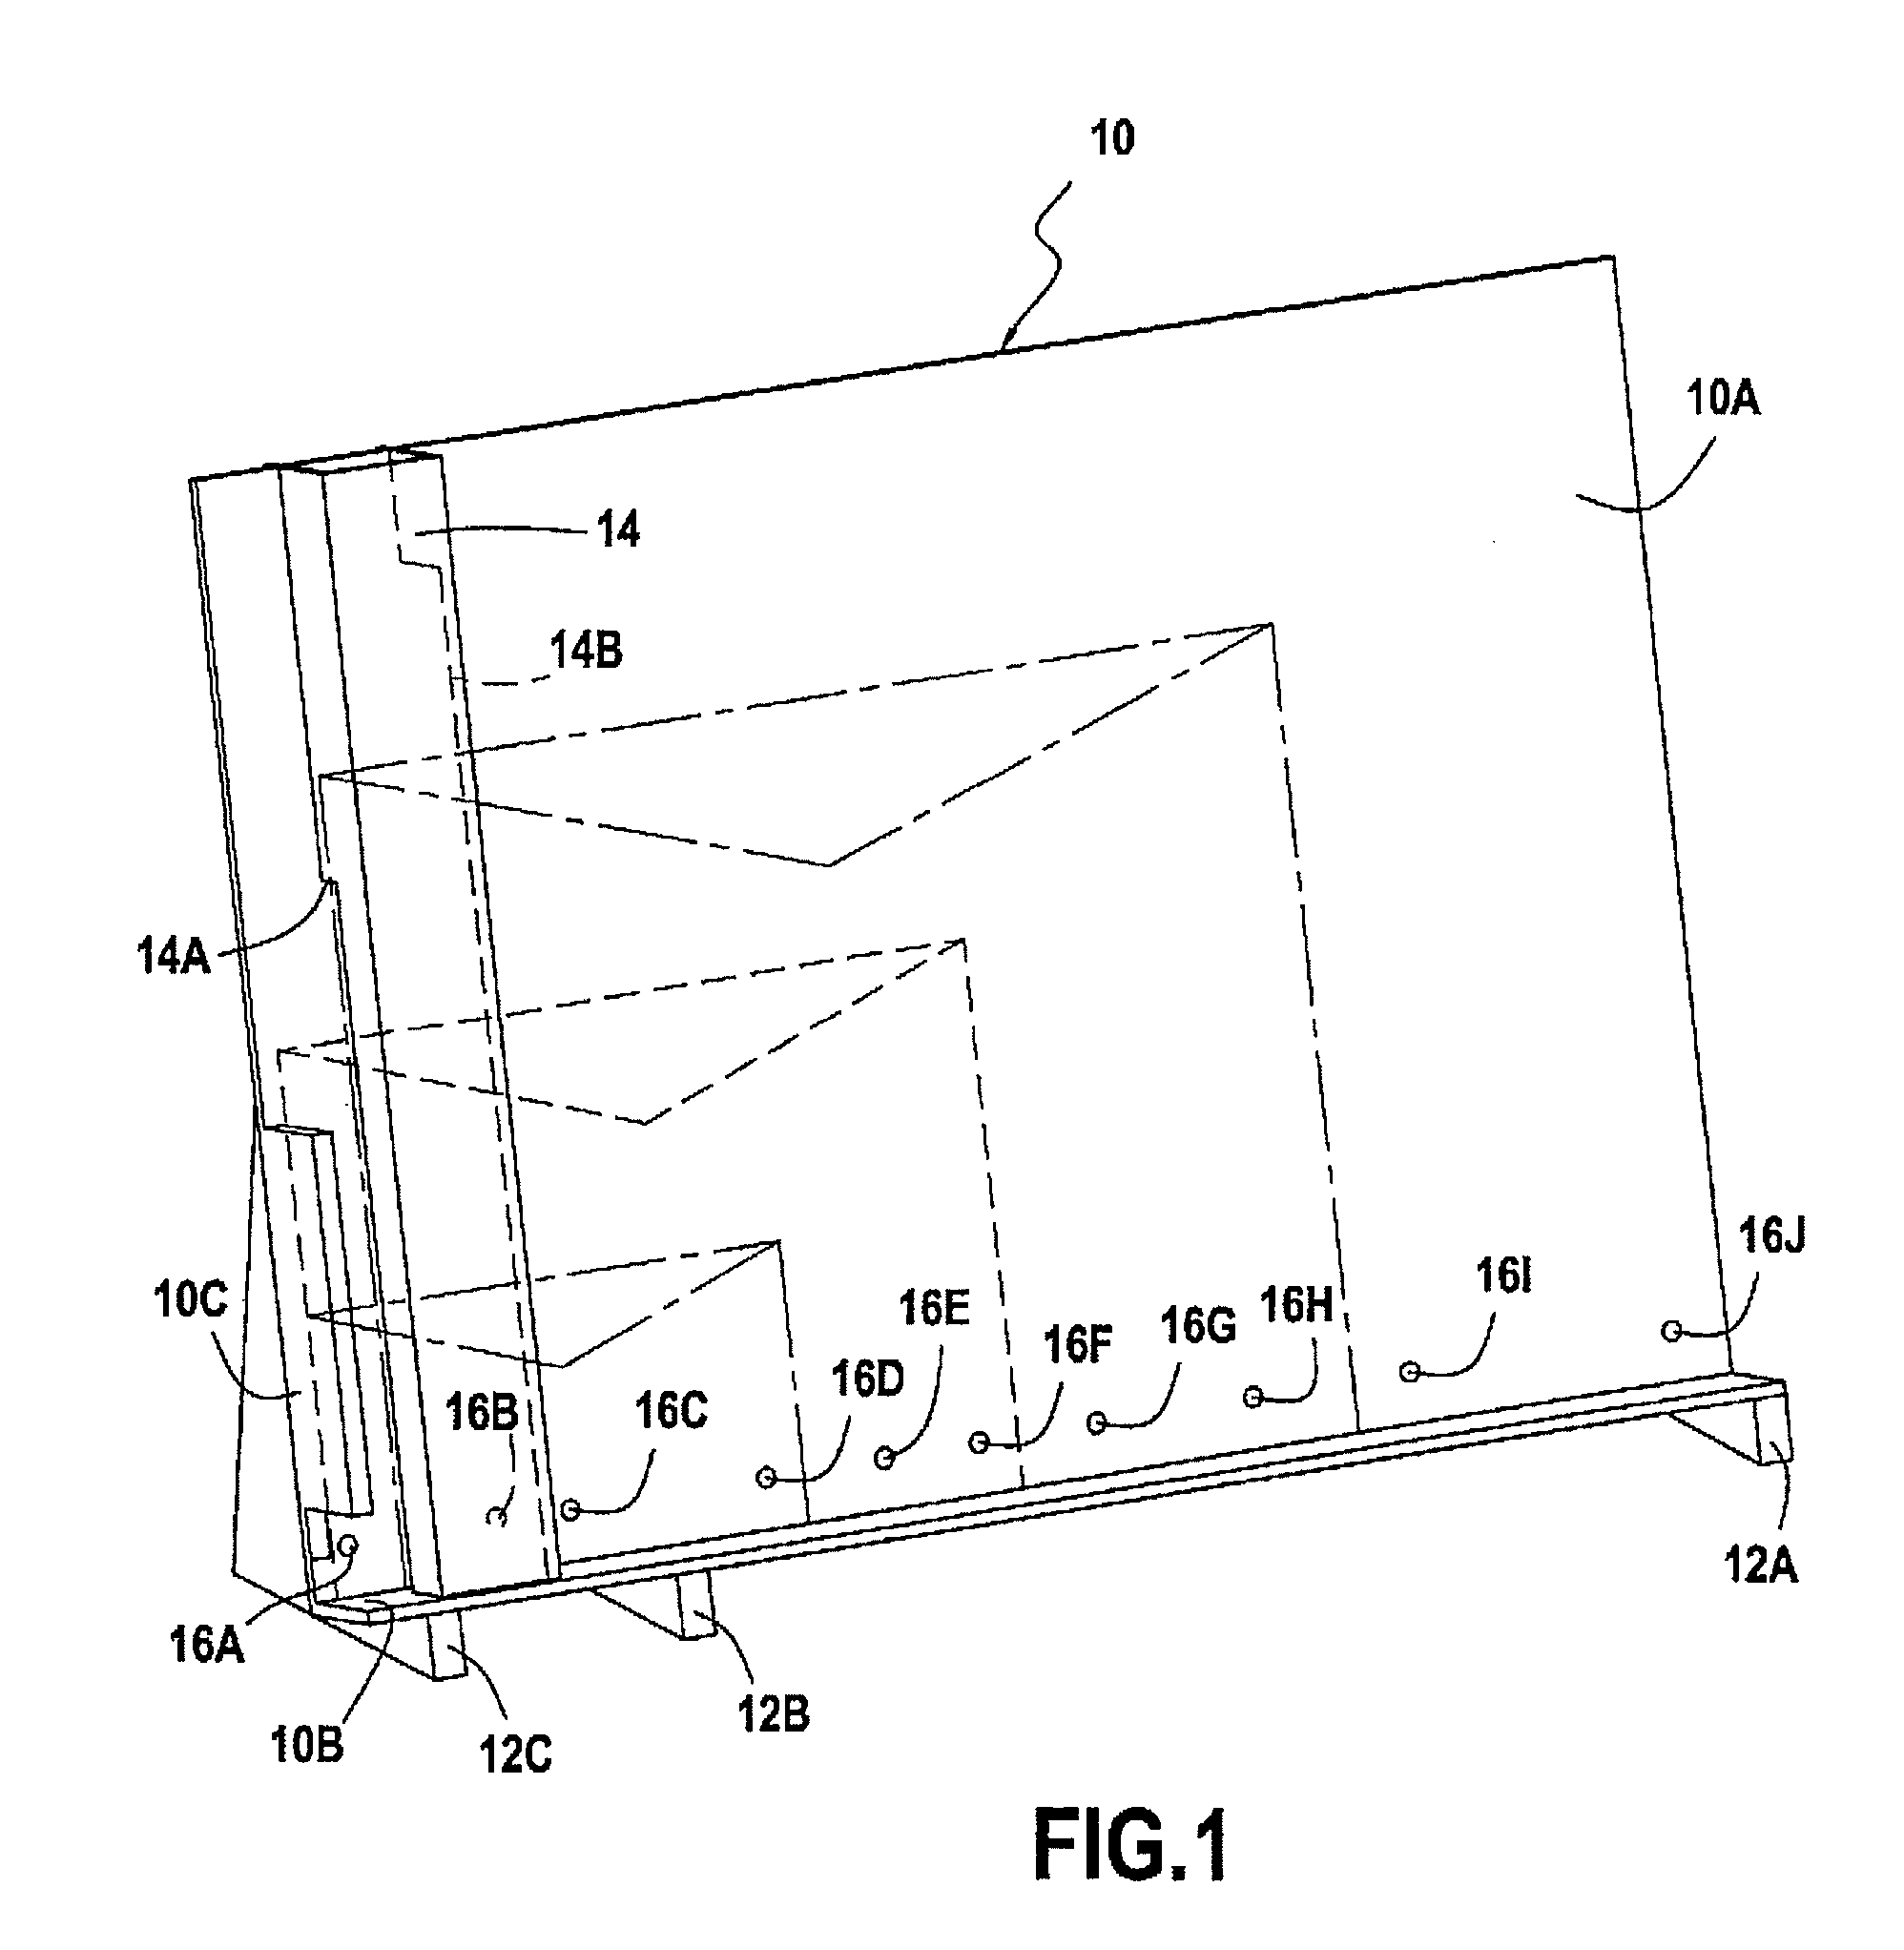 Device for automatically determining a category of mail to which a mailpiece delivered to a franking system belongs